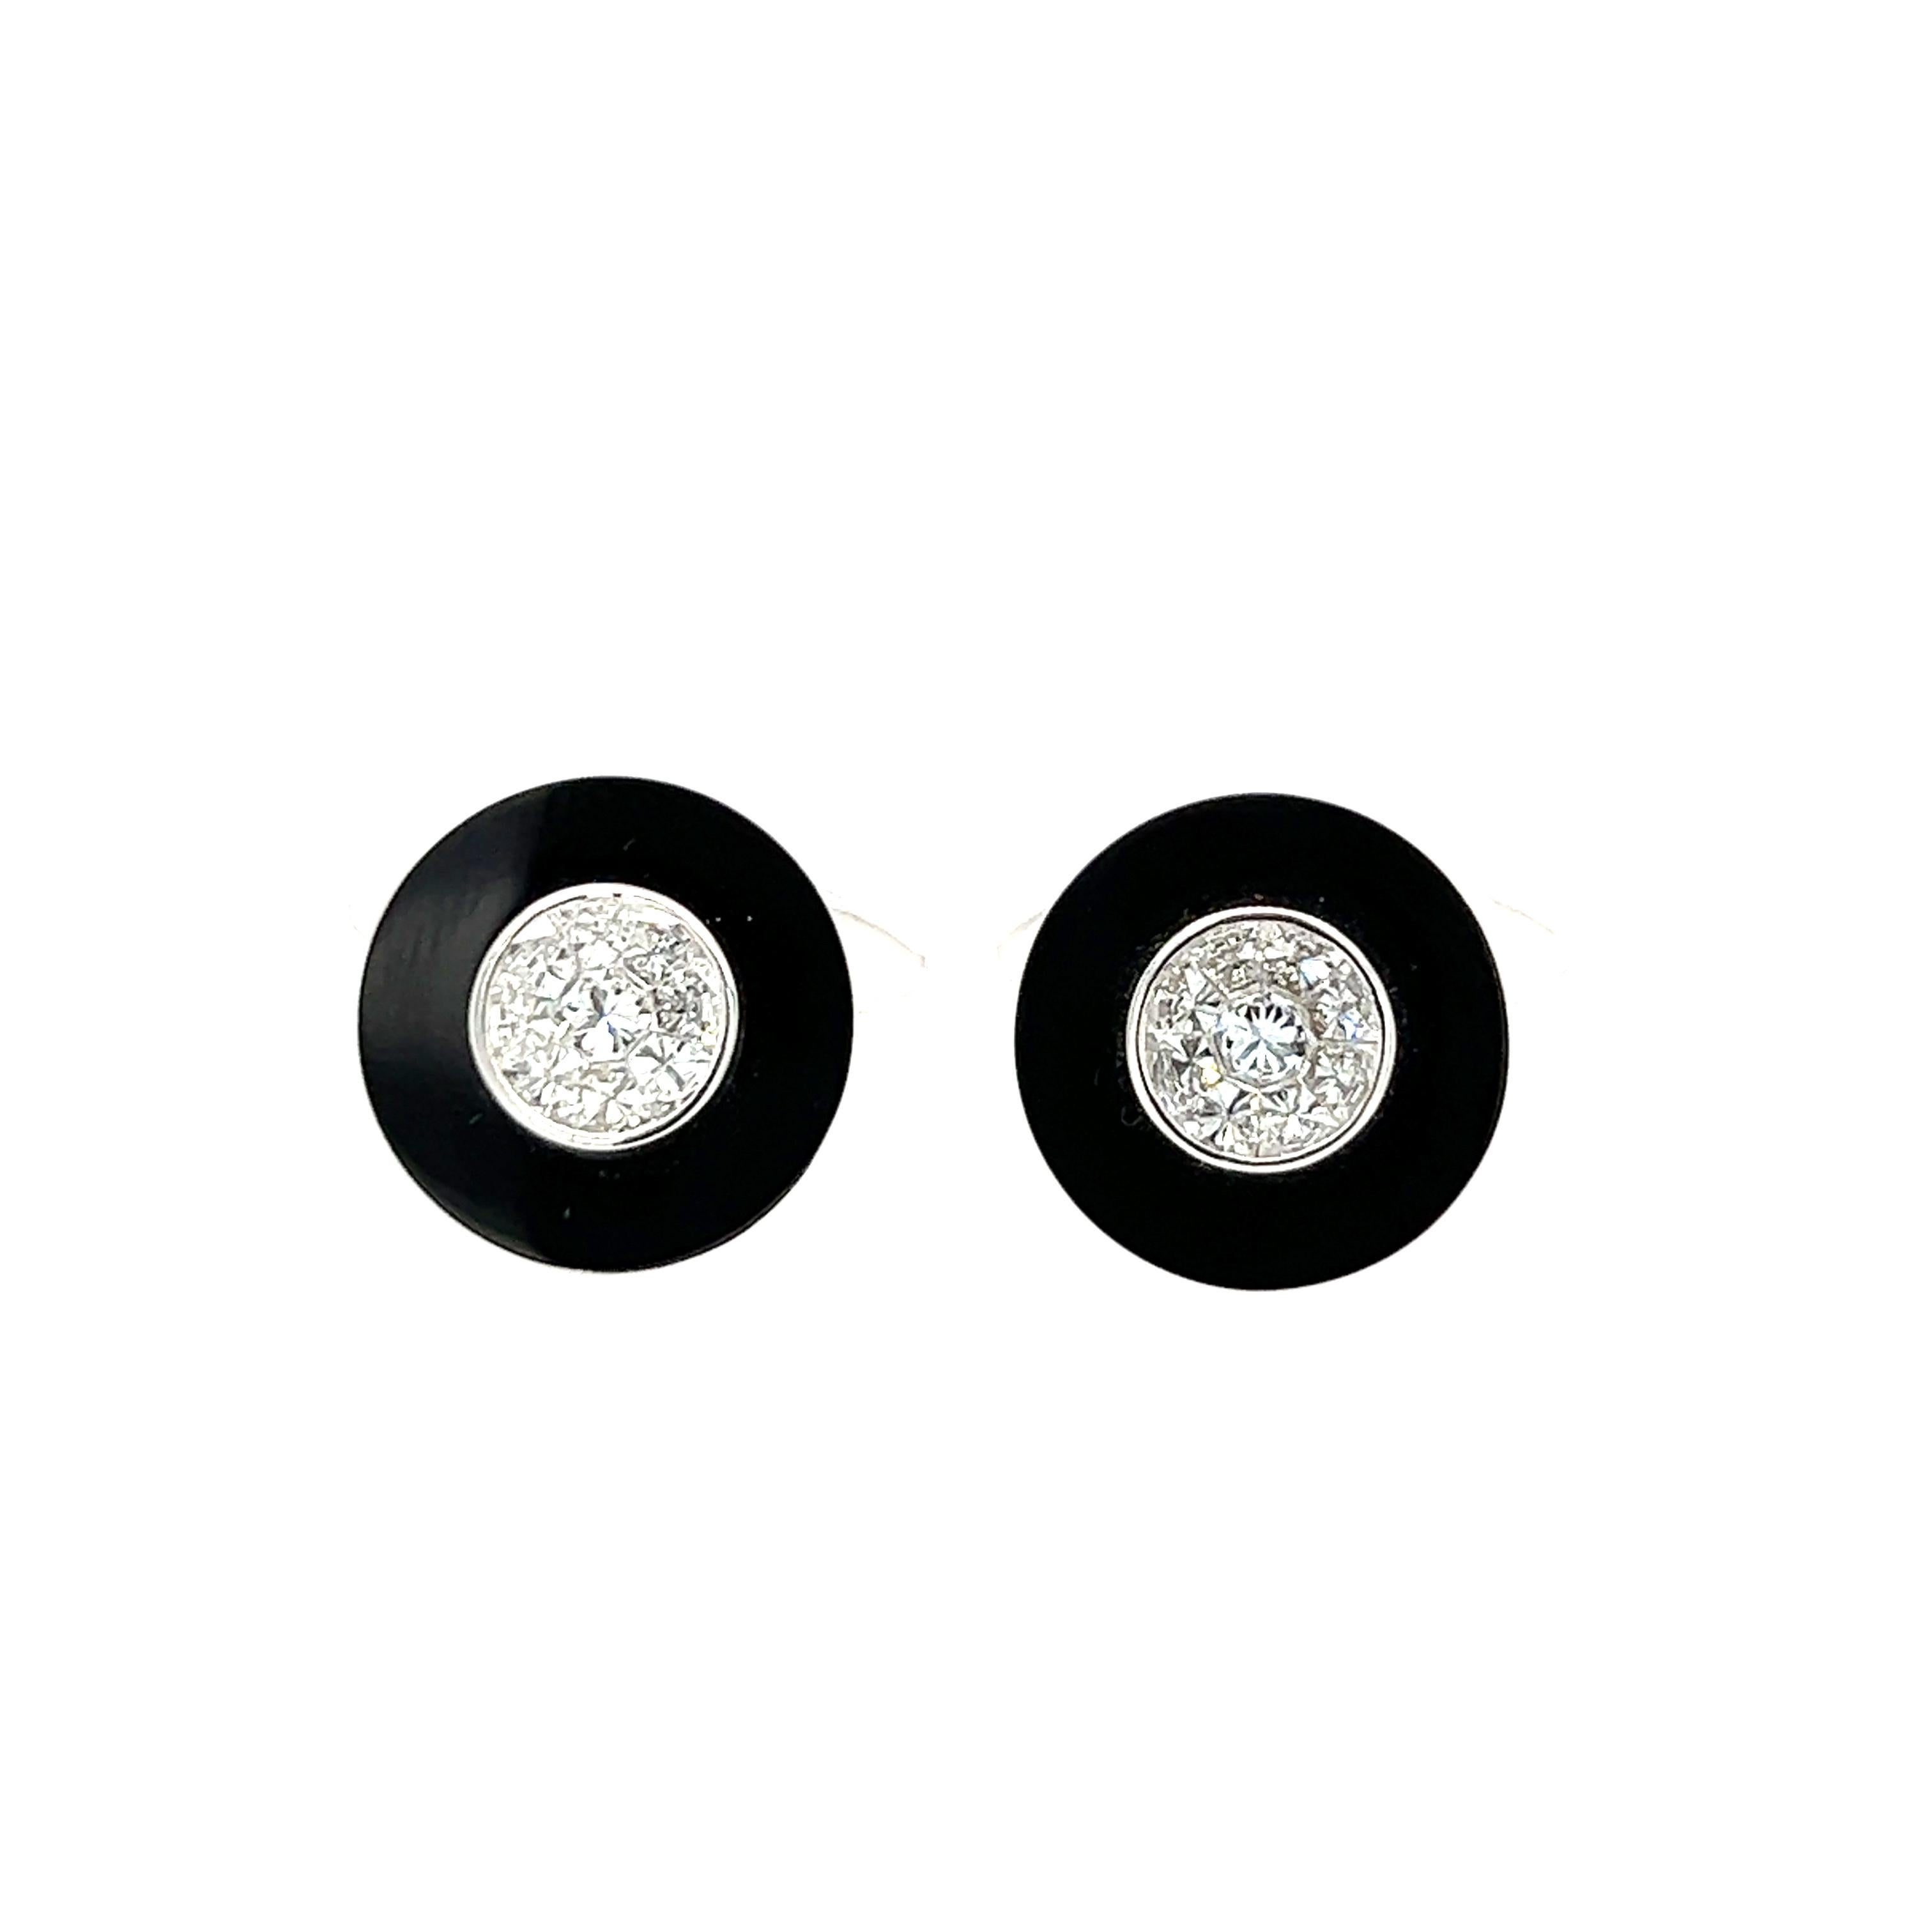 18K Exquisite Diamonds with Onyx Cufflinks . Only One Pair. 

18 Diamonds - 0.96 CT
2 ONYX - 8.23 CT
18KW 8.42 GM 

ONYX is super powerful stone. stone of all stones! Onyx offers up powerful vibrations of protection, strength, focus, and willpower.